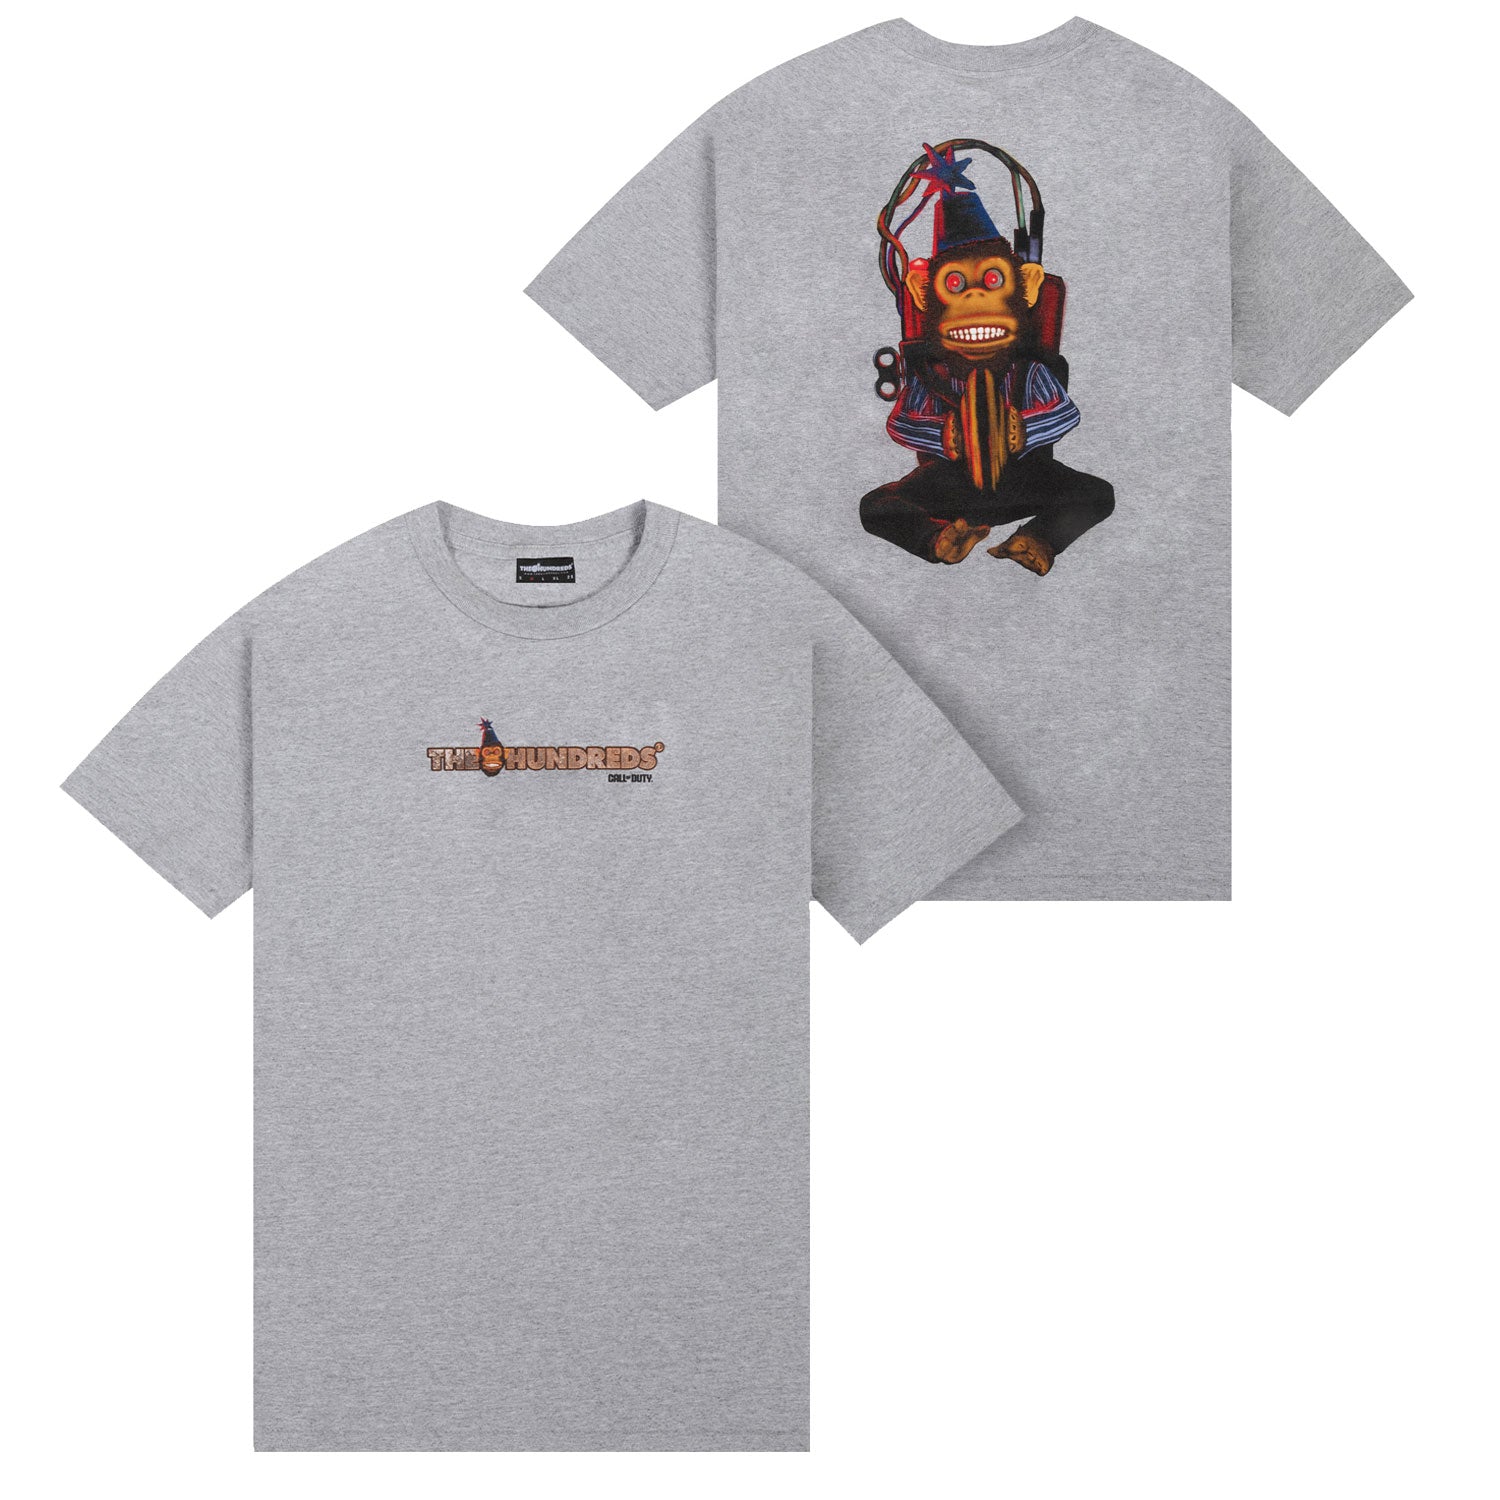 Call of Duty The Hundreds Monkey Bomb Heather Grey T-Shirt - front and back views